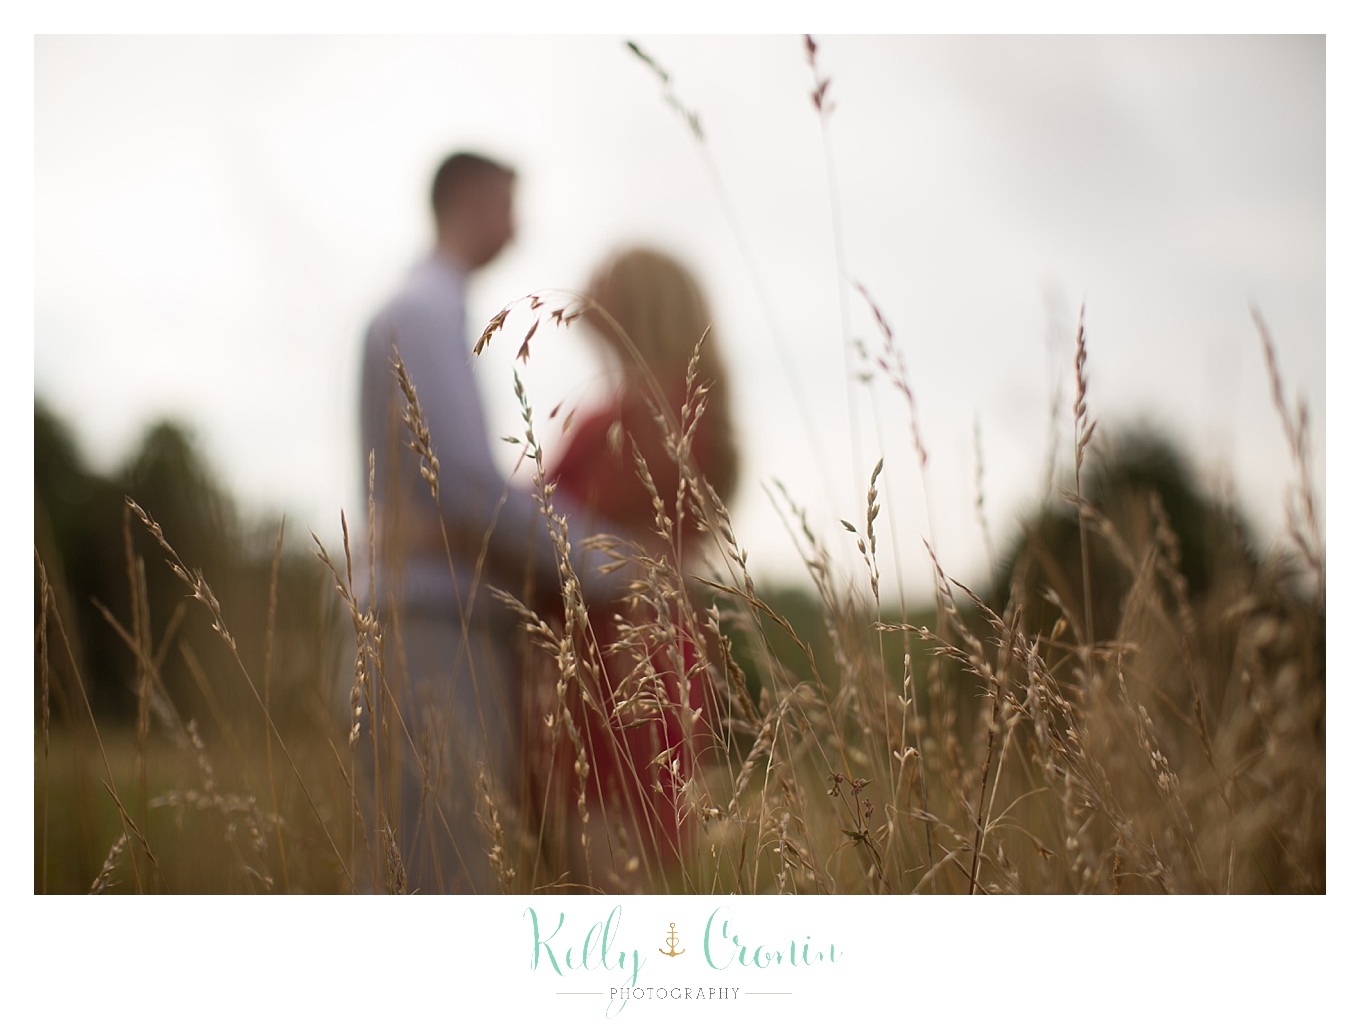 A couple embrace each other | Kelly Cronin Photography | Outdoor Engagement Session